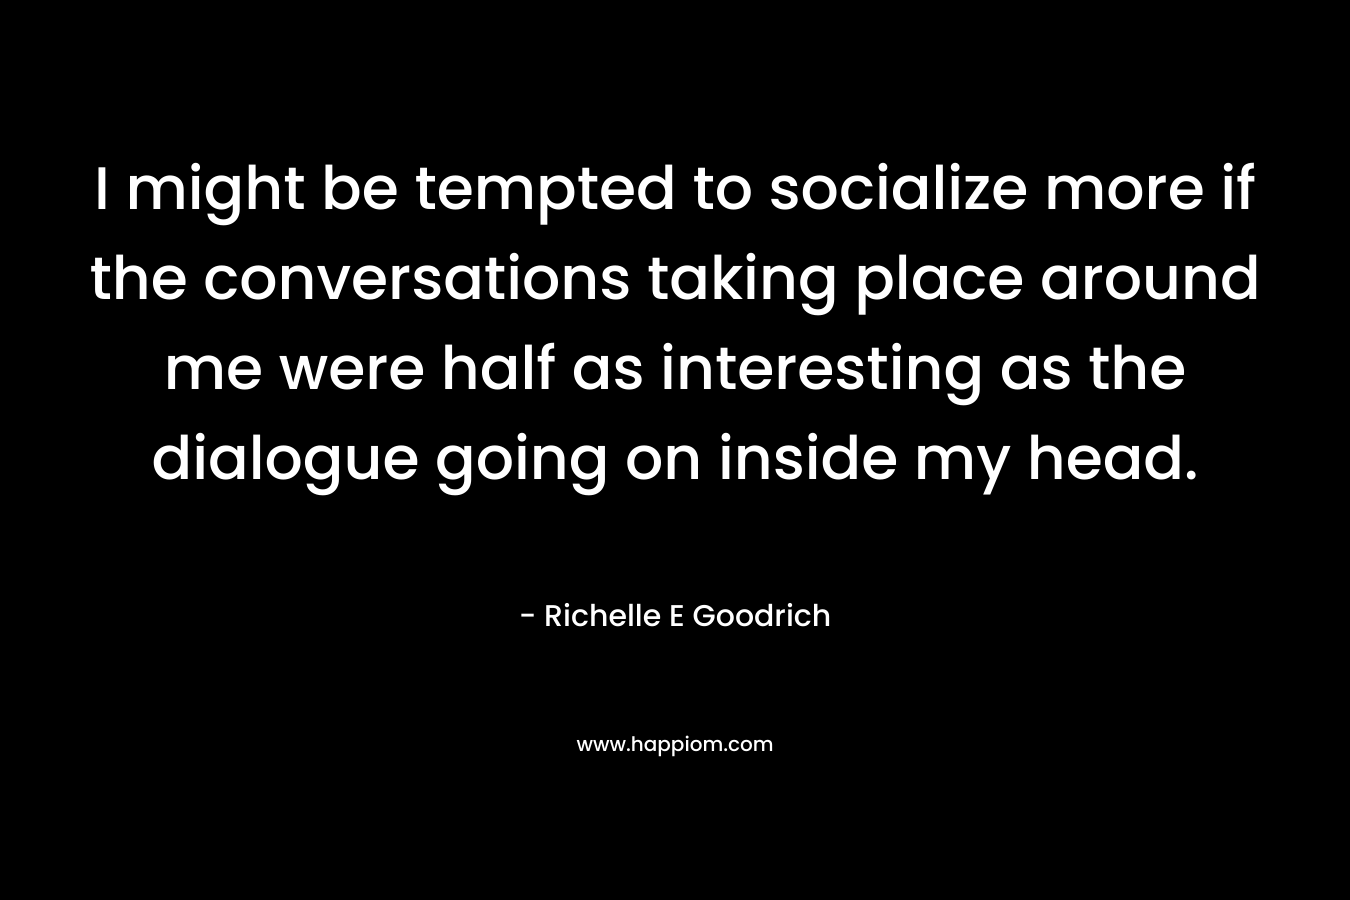 I might be tempted to socialize more if the conversations taking place around me were half as interesting as the dialogue going on inside my head. – Richelle E Goodrich